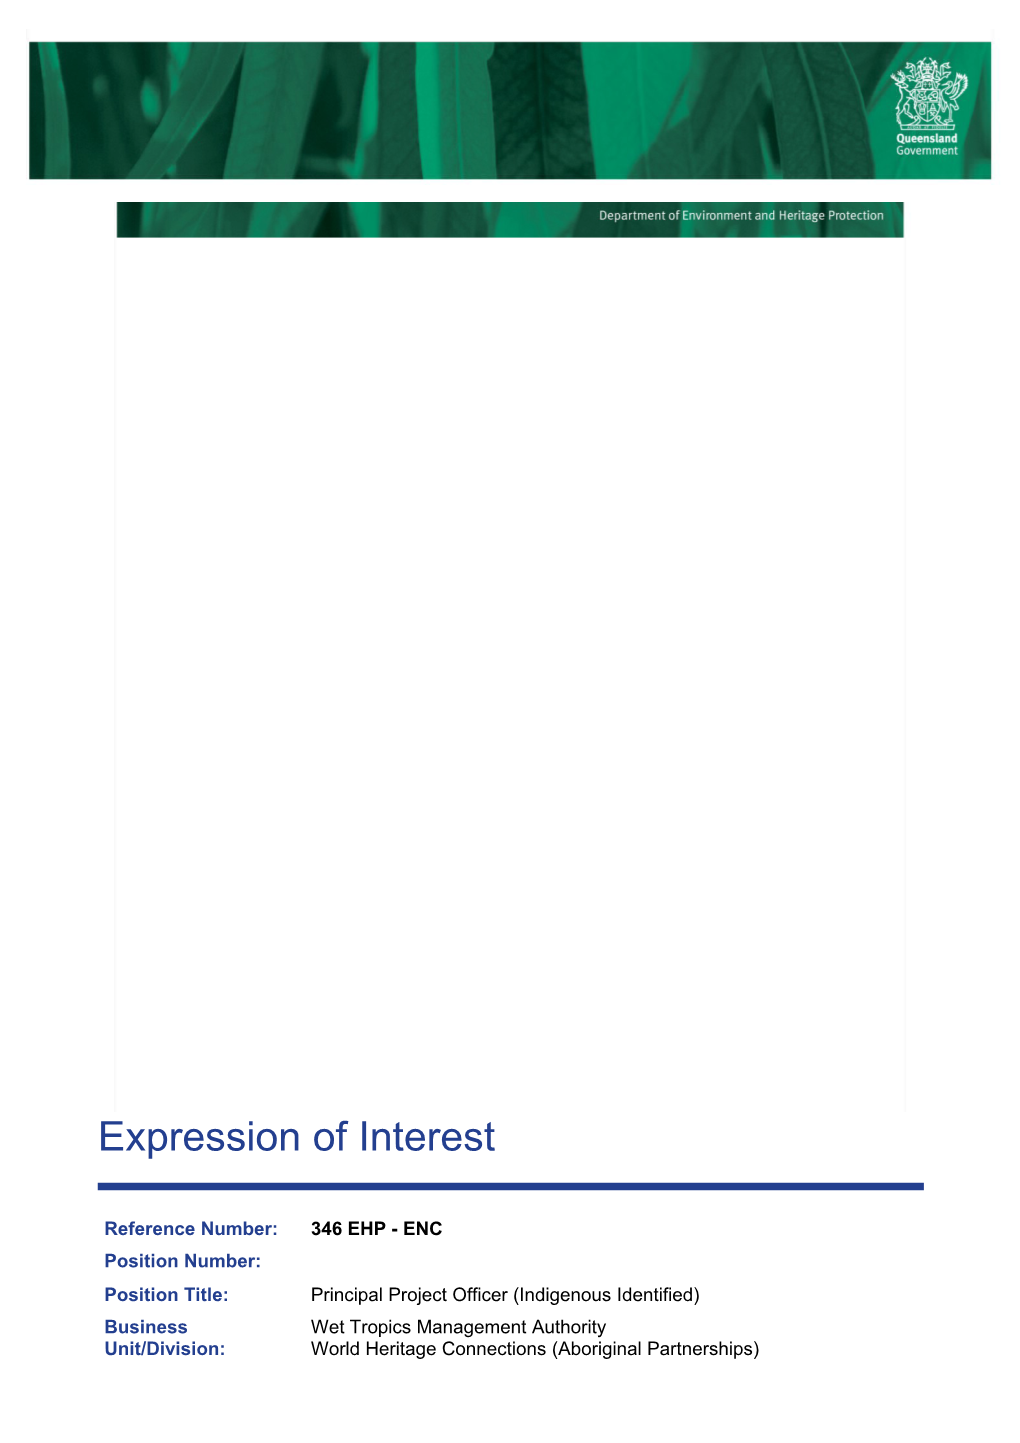 Expressions of Interest Template